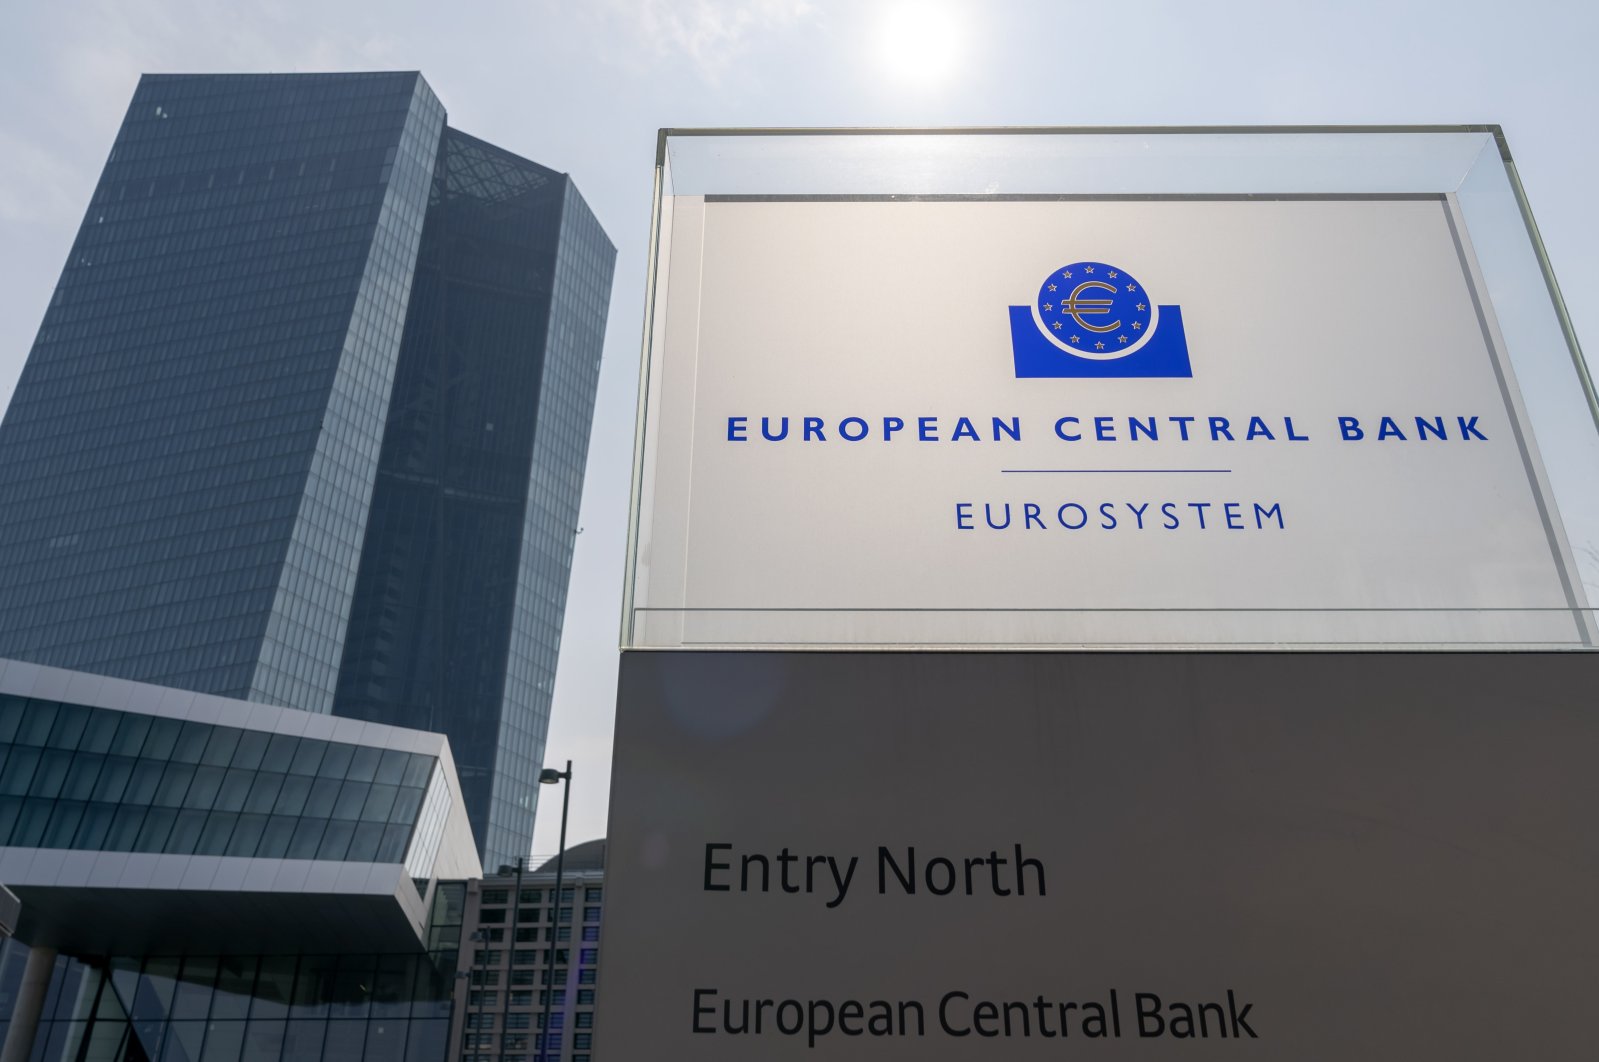 A general view of a sign in front of the building of the European Central Bank (ECB) in Frankfurt am Main, Germany, April 10, 2020. (EPA Photo)